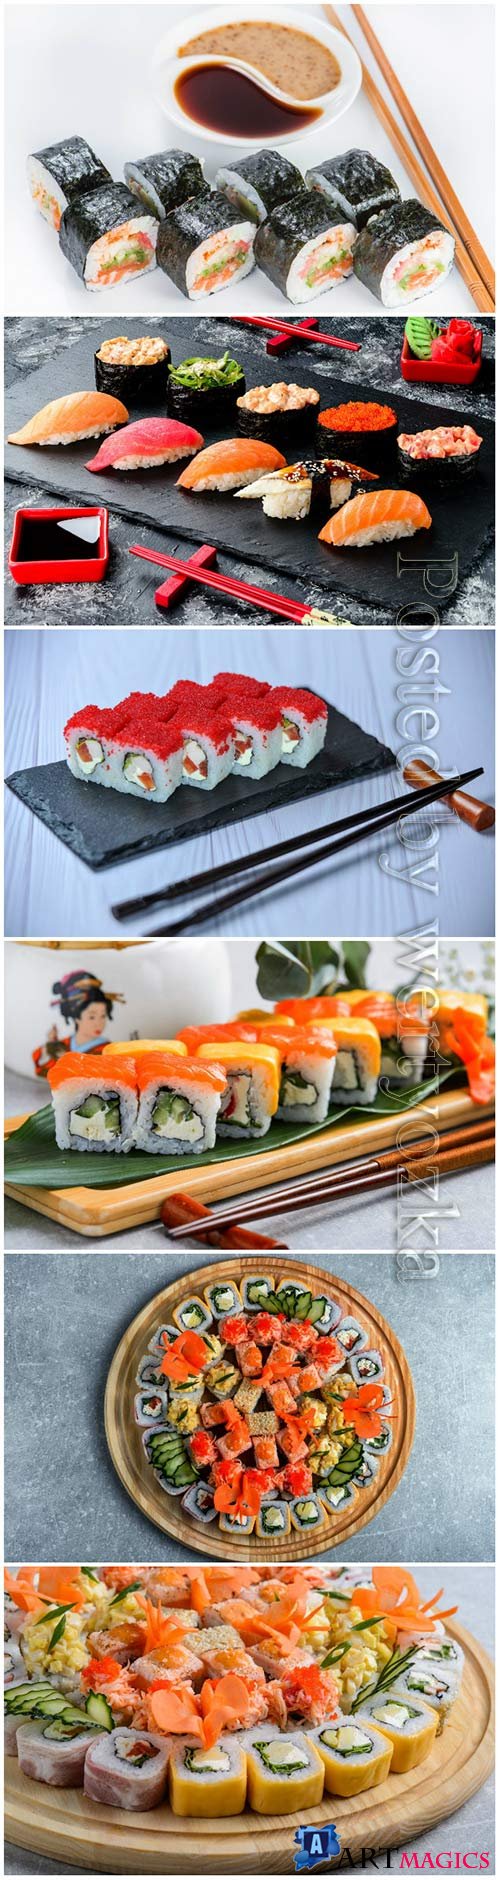 Sushi sets, delicious food